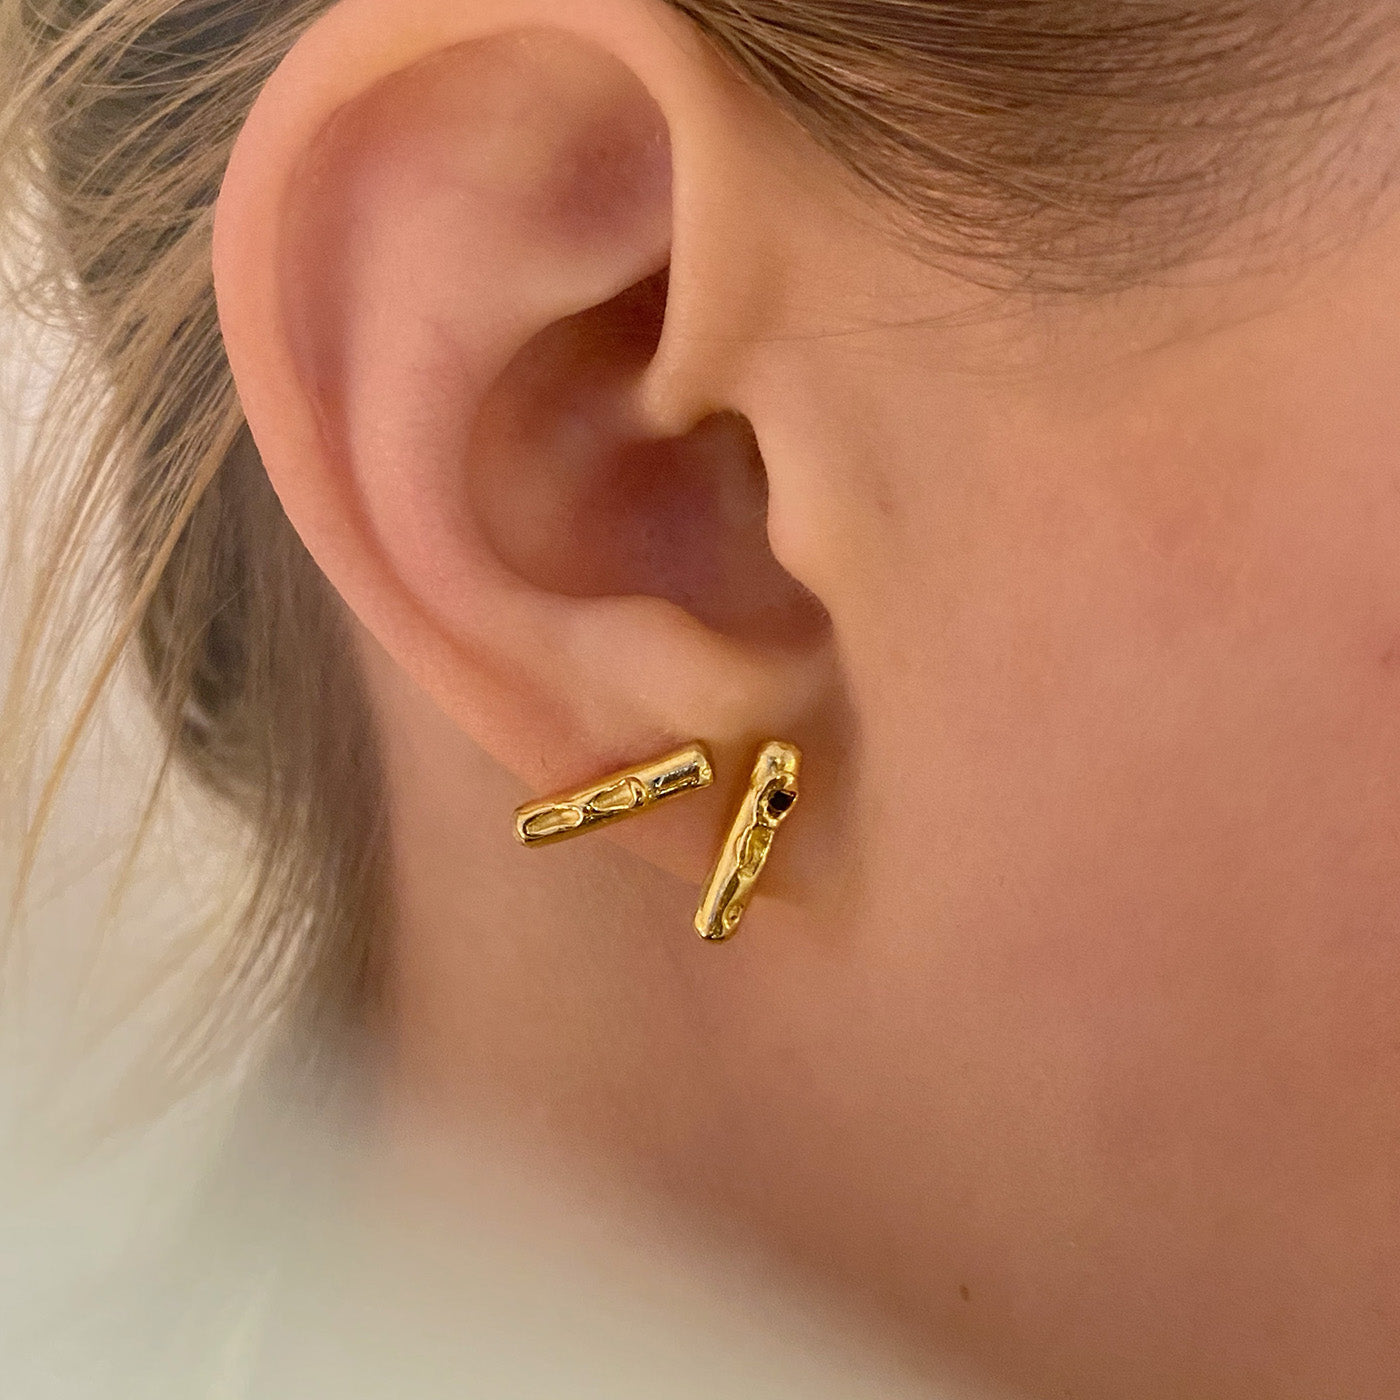 earrings cenote bar silver 18ct gold plated black diamond product view innan jewellery independent atelier berlin in stock